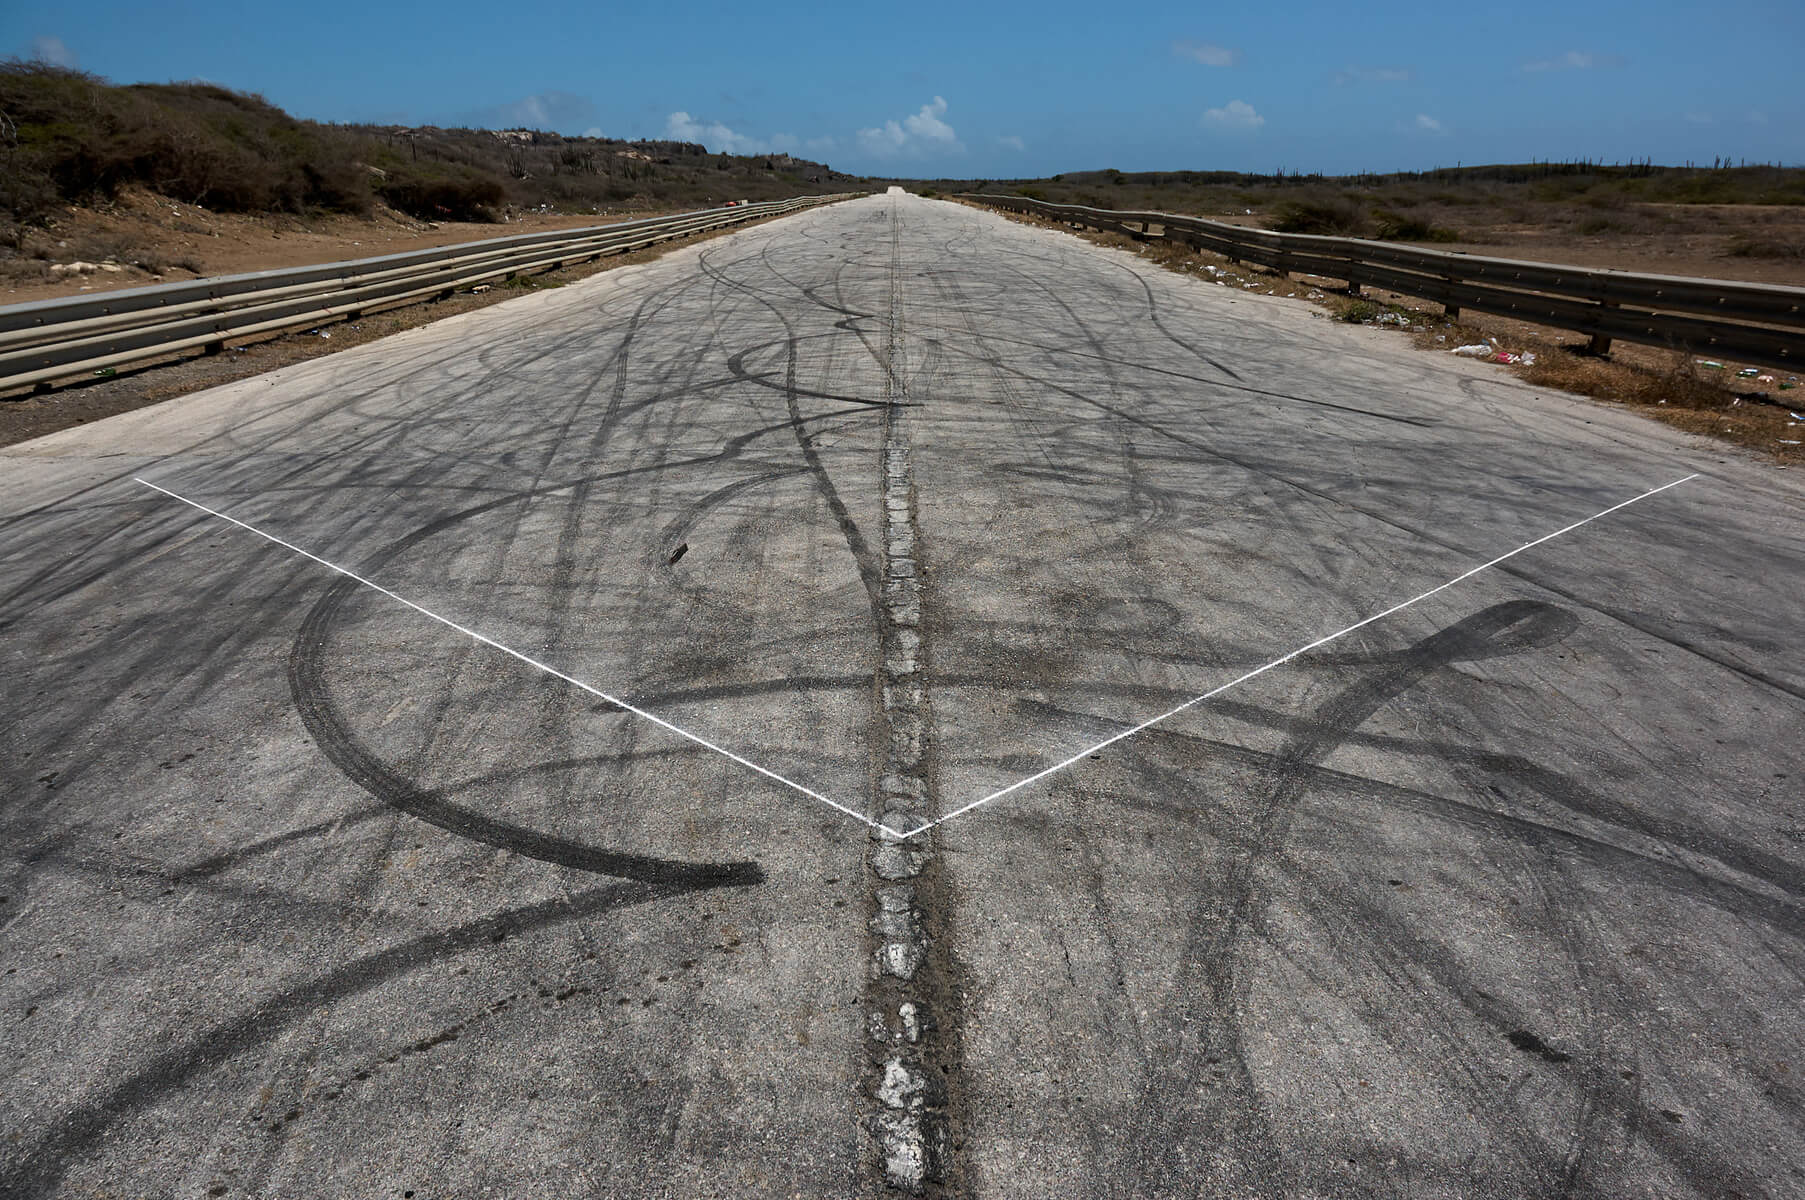 Chalk linedrawing on an road with no cars yet with many skid marks